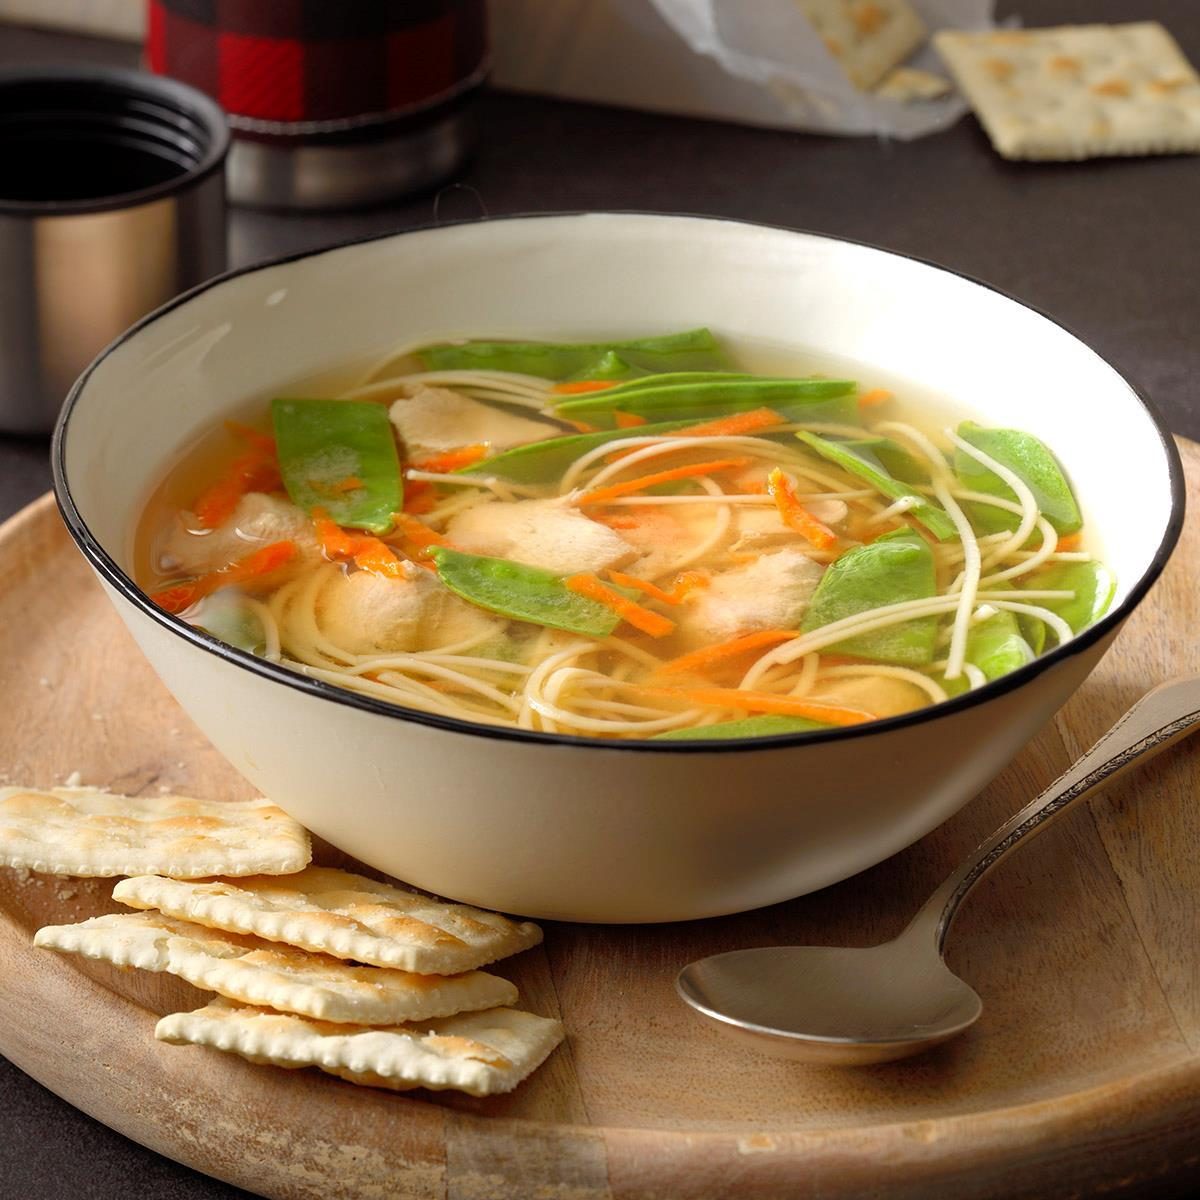 Chicken Noodle Soup Recipe: How to Make It